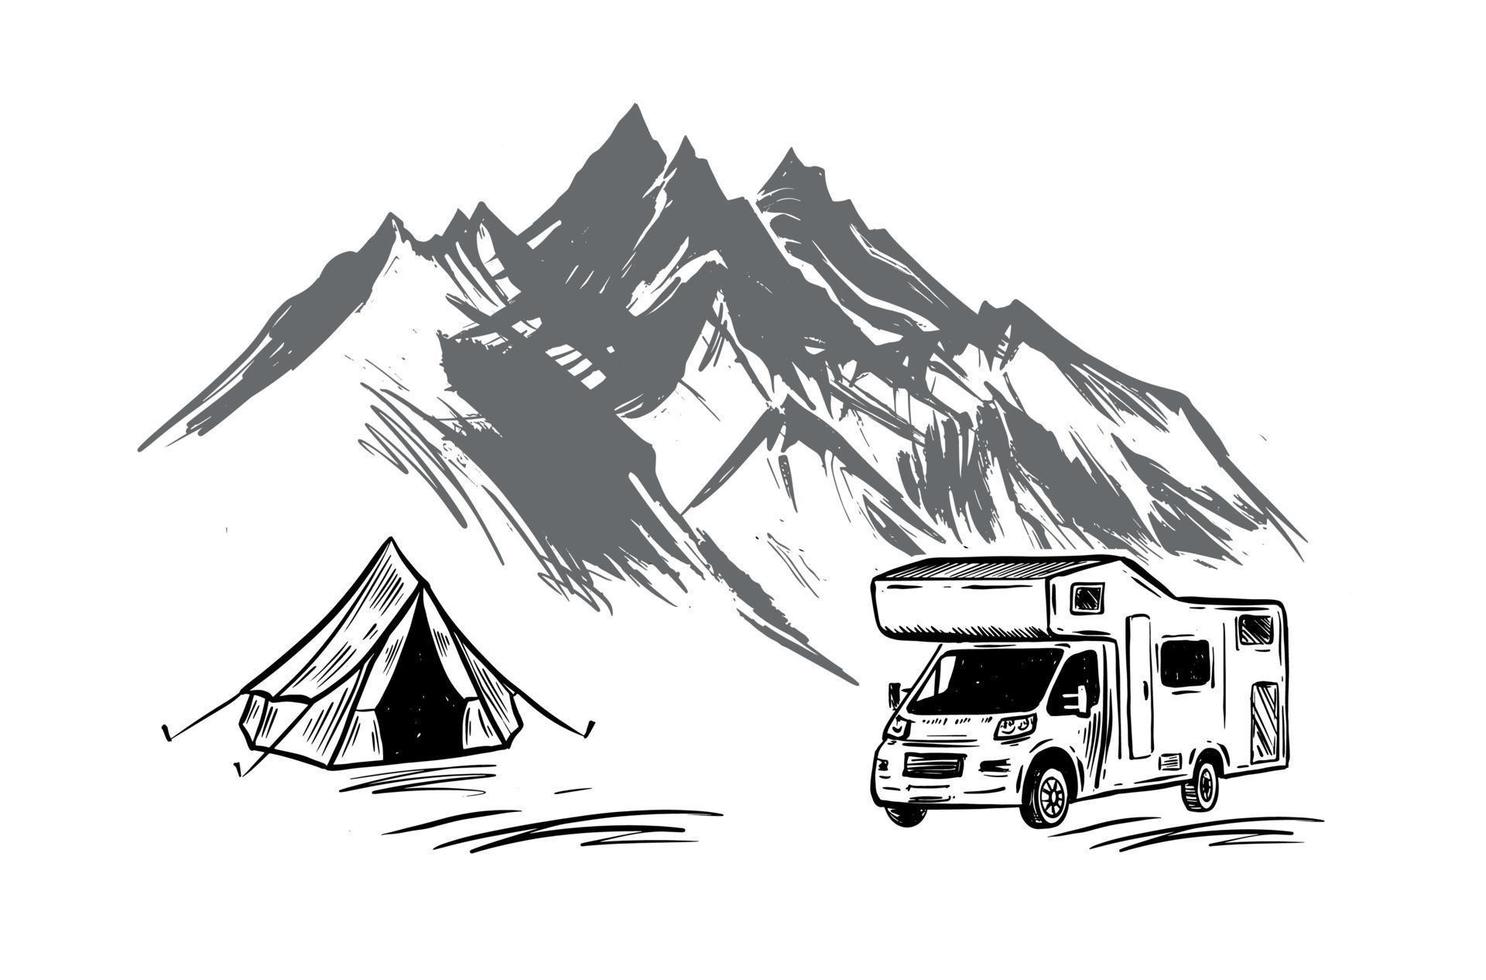 Motor home, Mountain landscape, Camping in nature, hand drawn style vector illustrations.